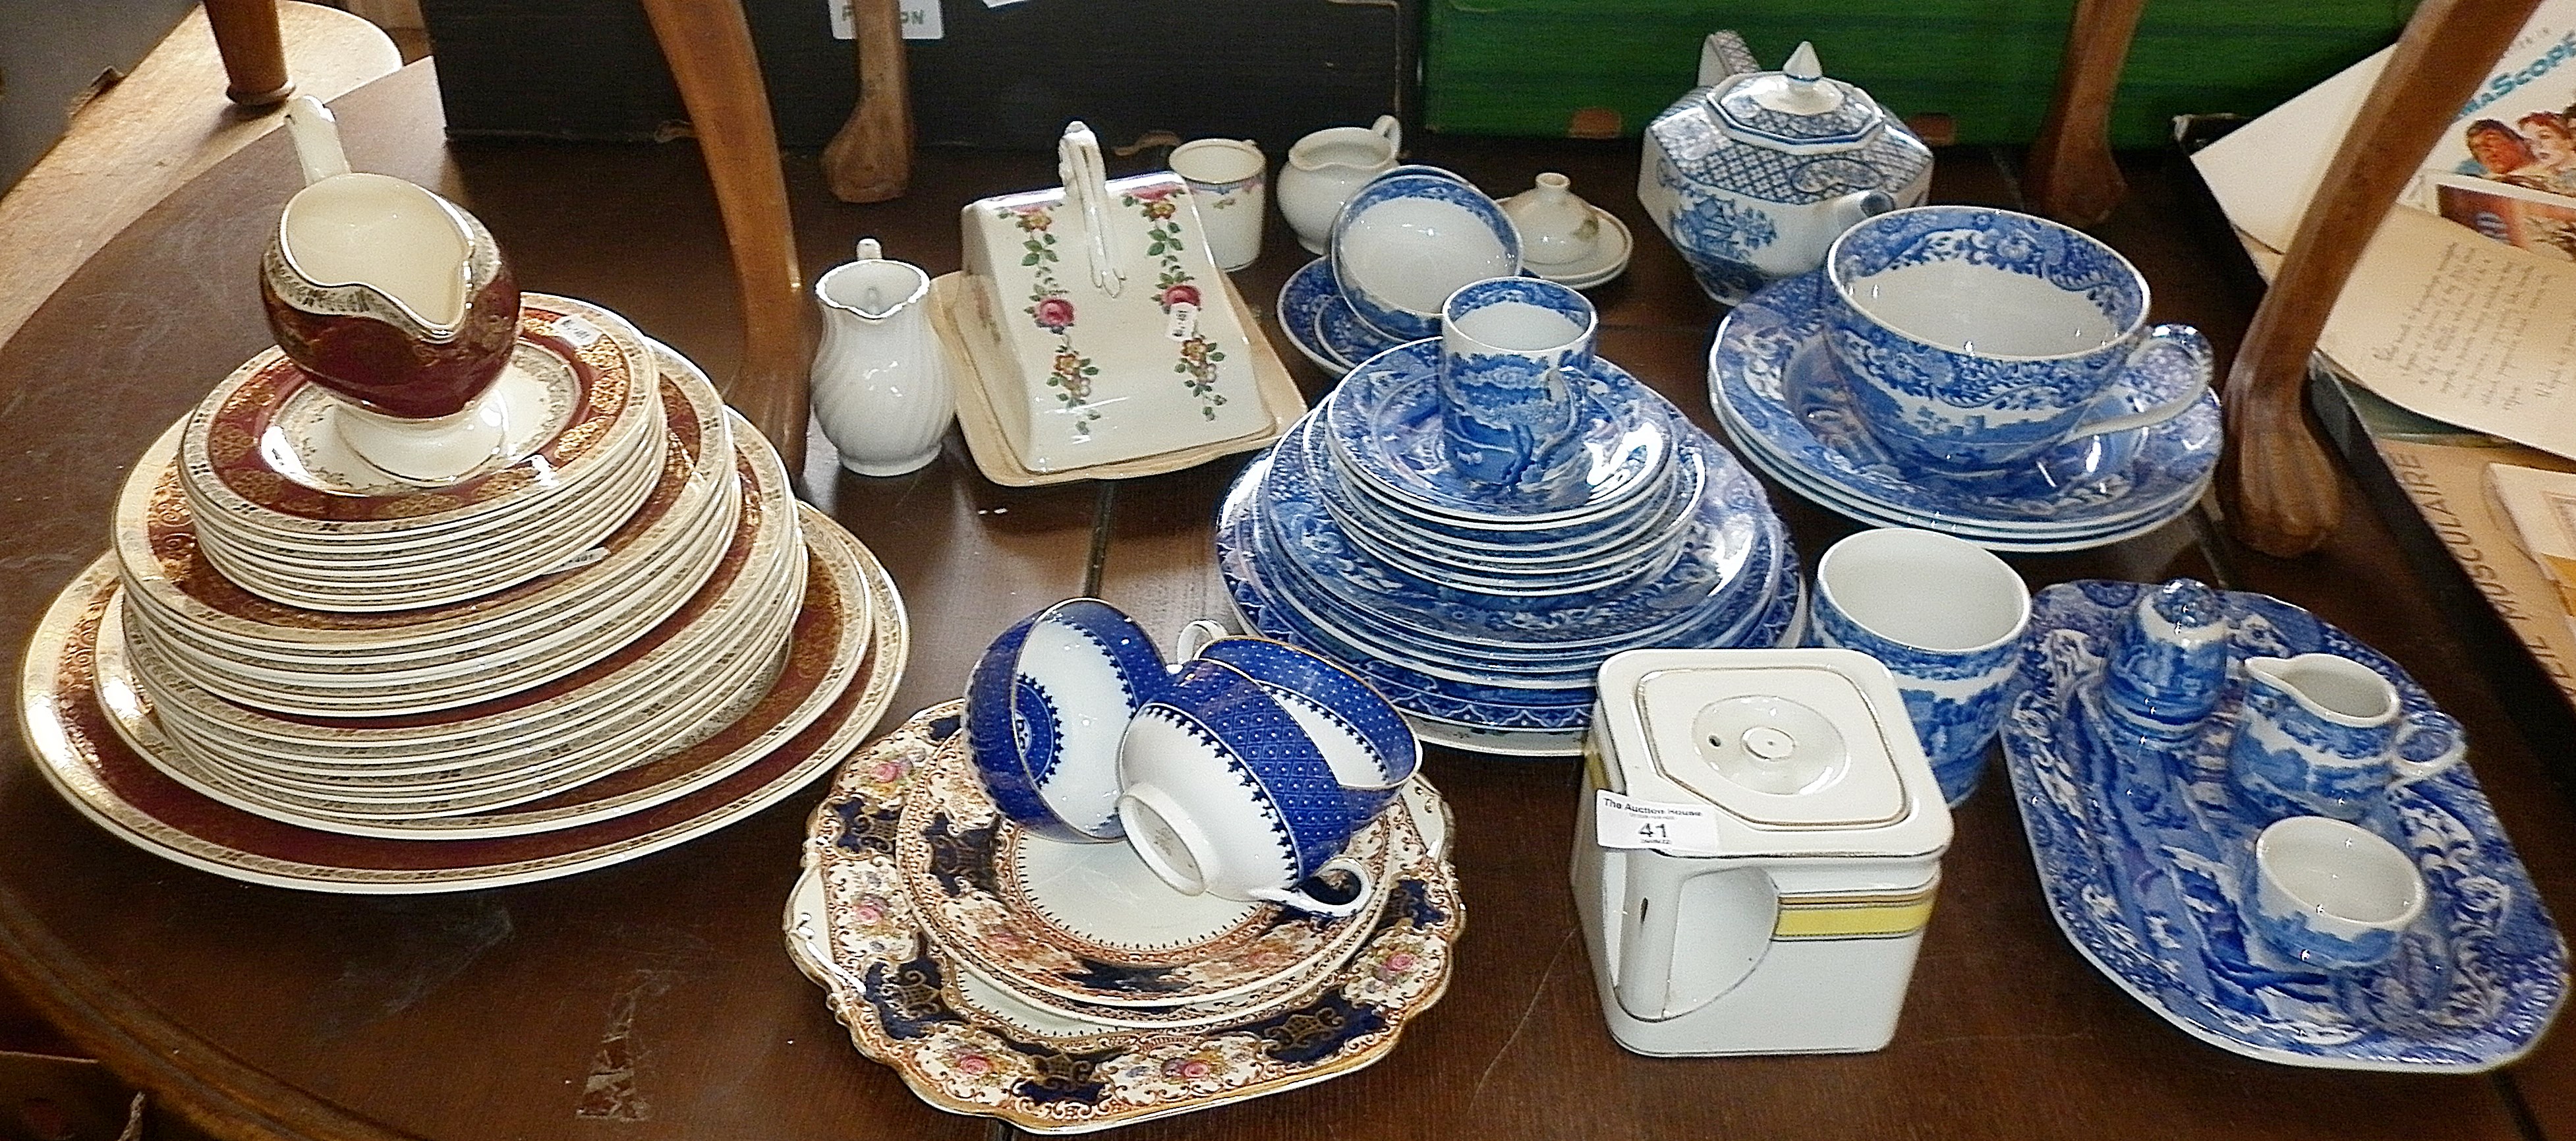 A Wedgwood & Co "Cube" teapot and a large quantity of assorted Italian Spode blue and white china